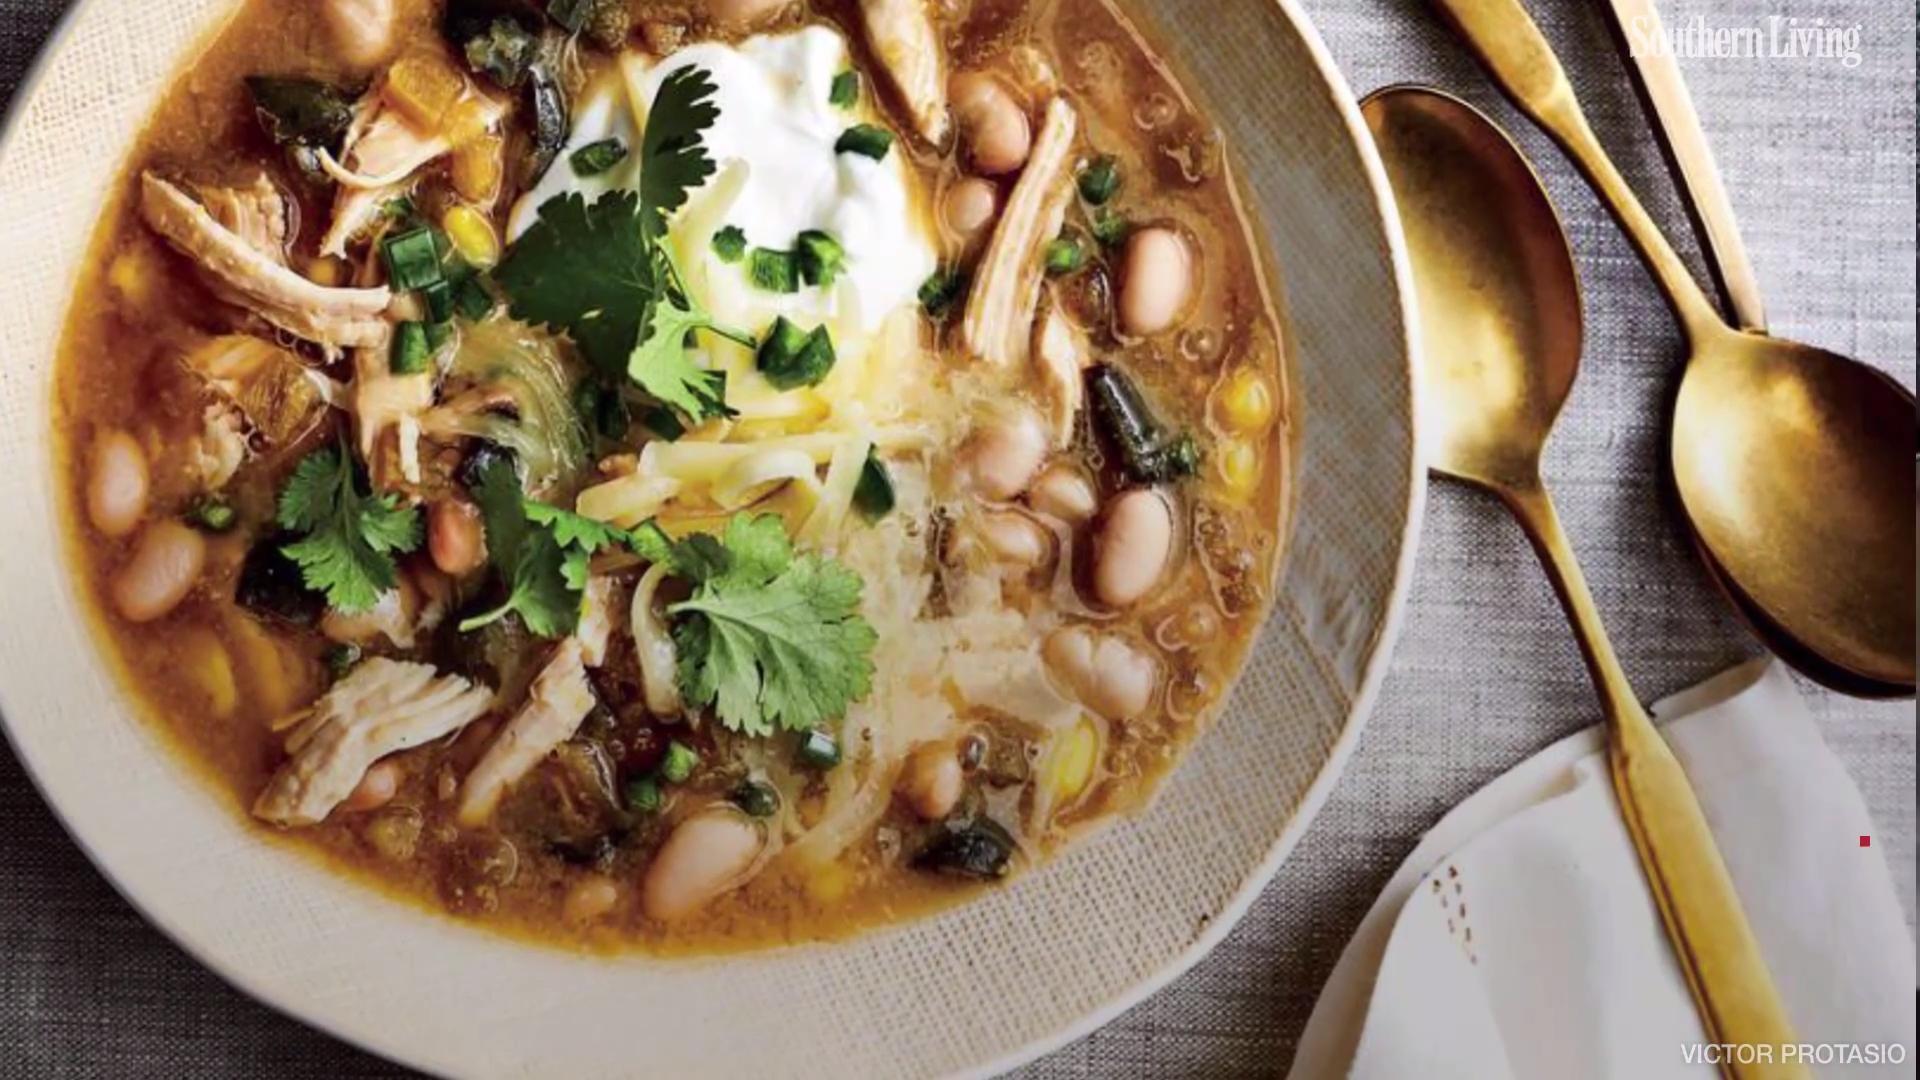 Hearty Chili Recipes That'll Warm You Right Up